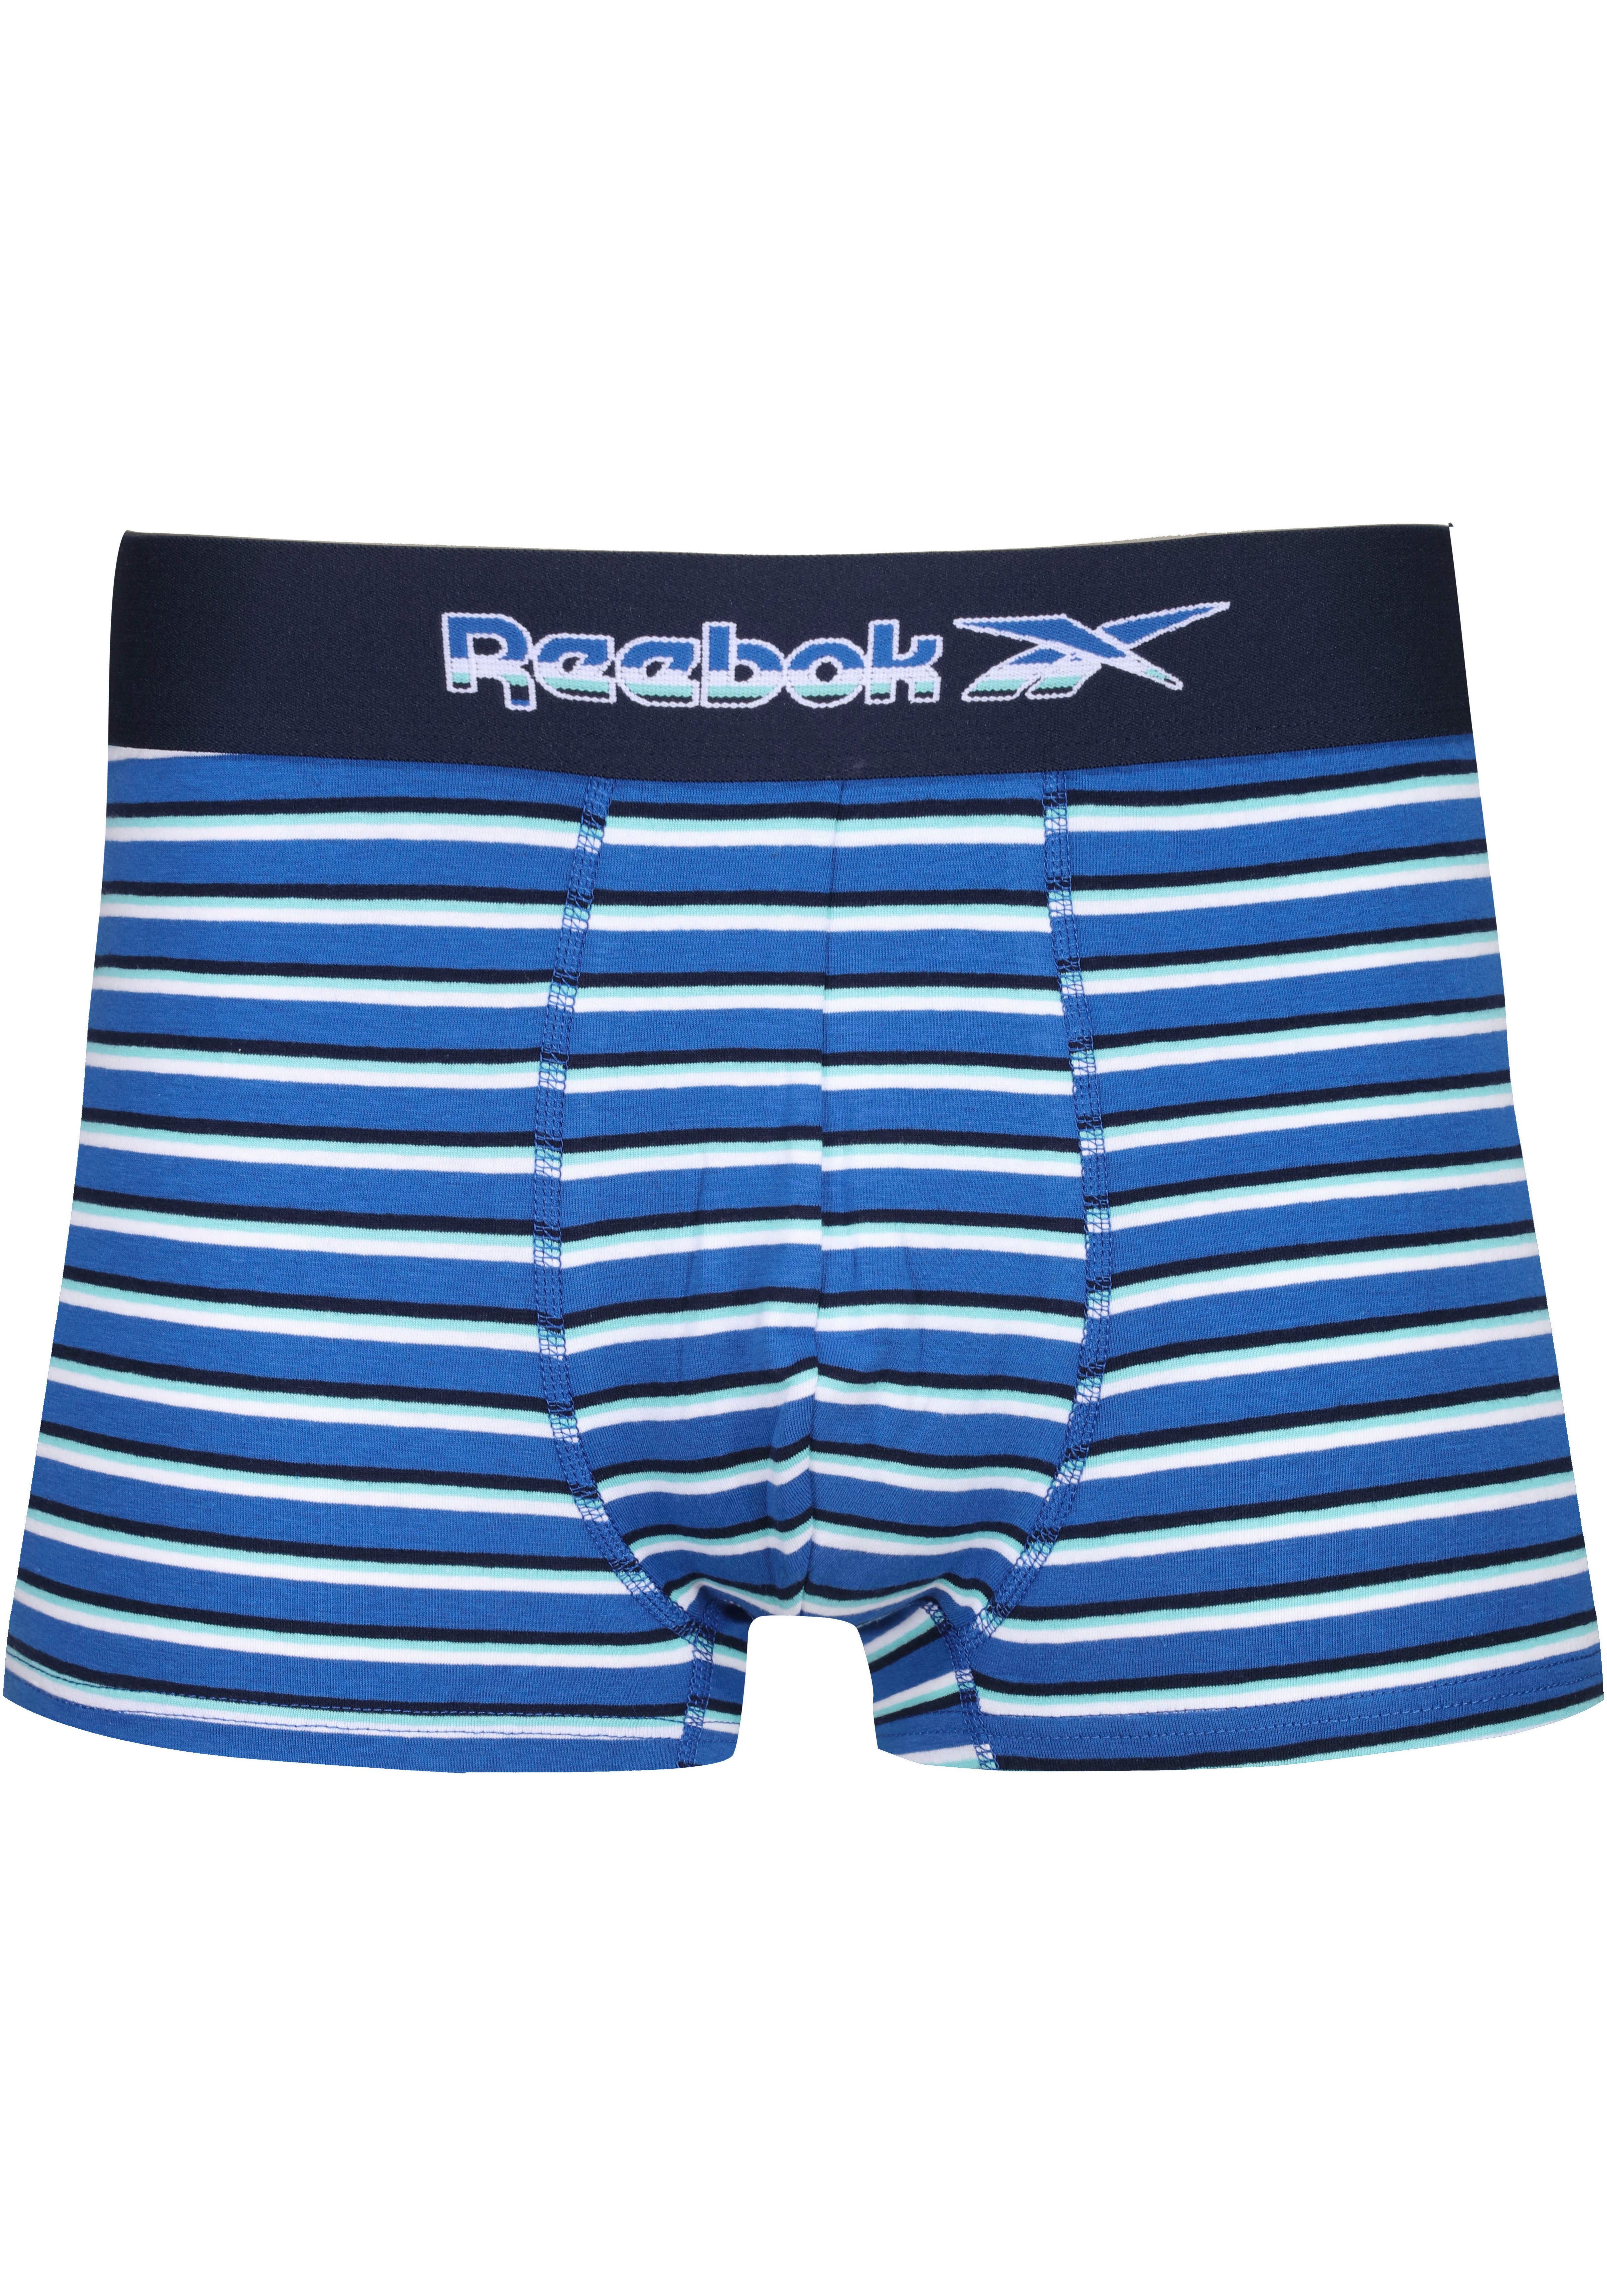 (Packung, BARRY Reebok Trunk 3-St)